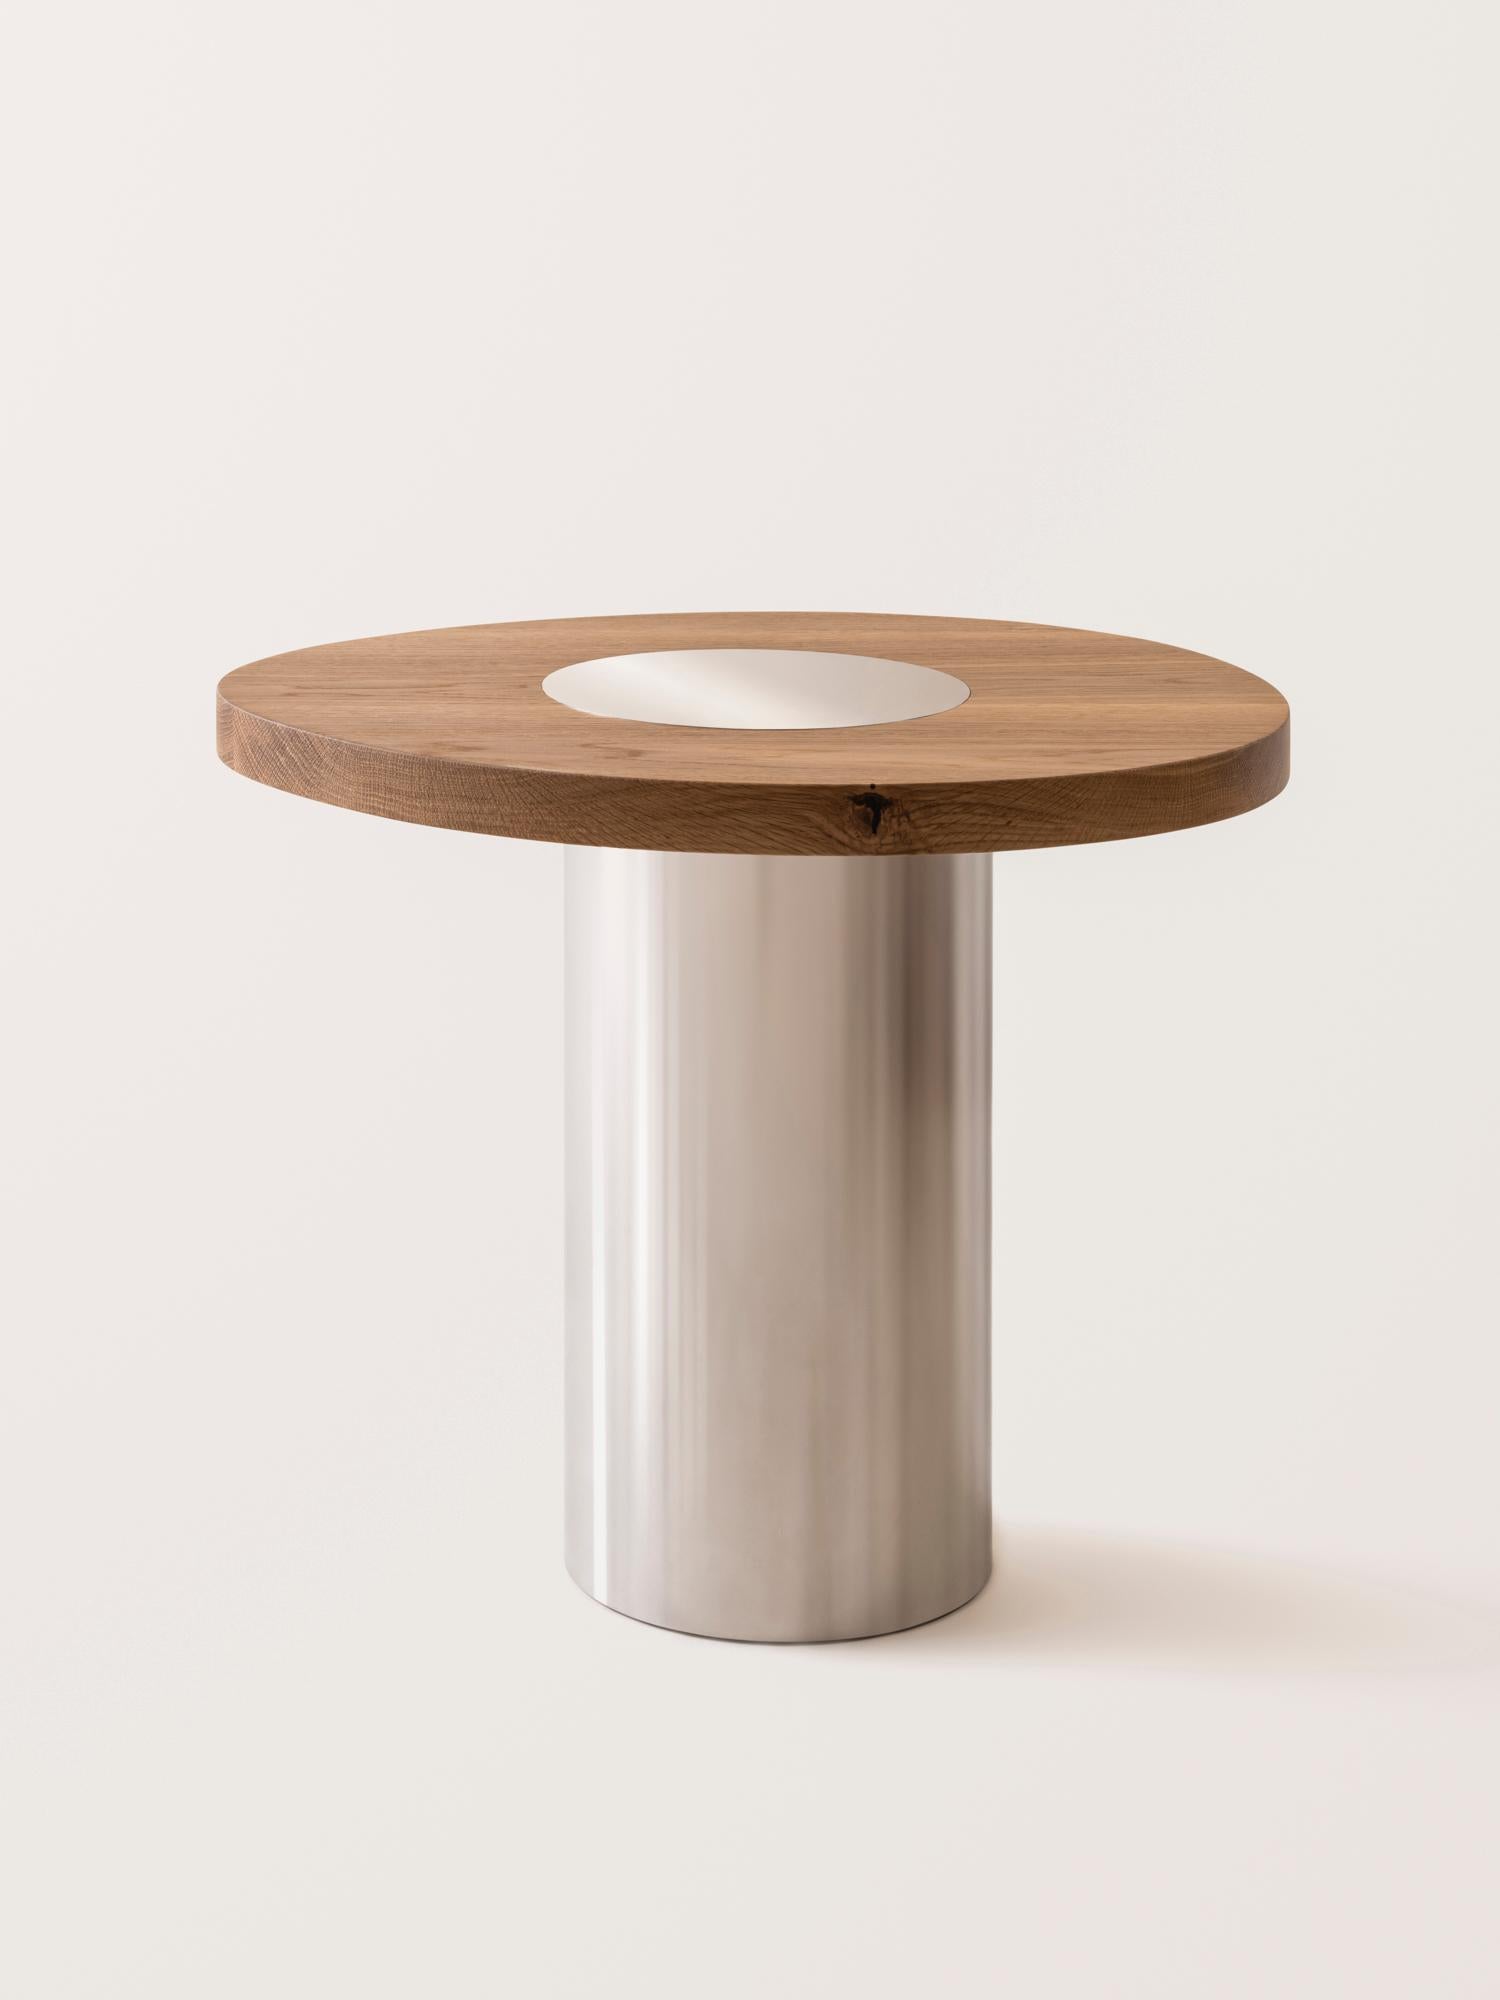 Silo Side Table Medium - Oak and Polished Stainless Steel In New Condition For Sale In New York, NY